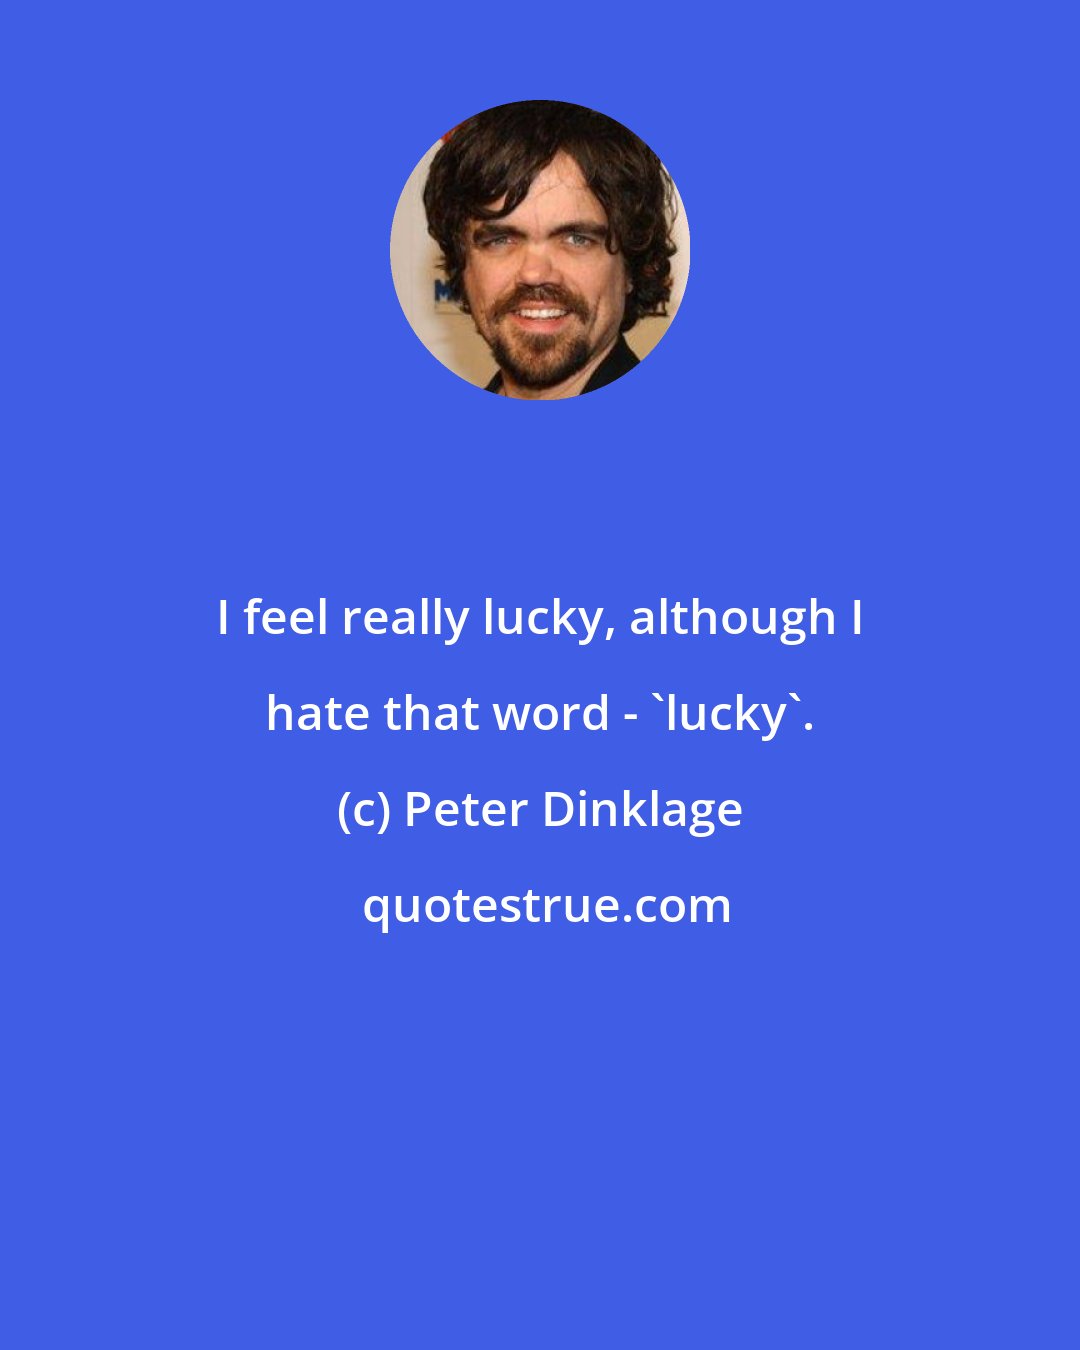 Peter Dinklage: I feel really lucky, although I hate that word - 'lucky'.